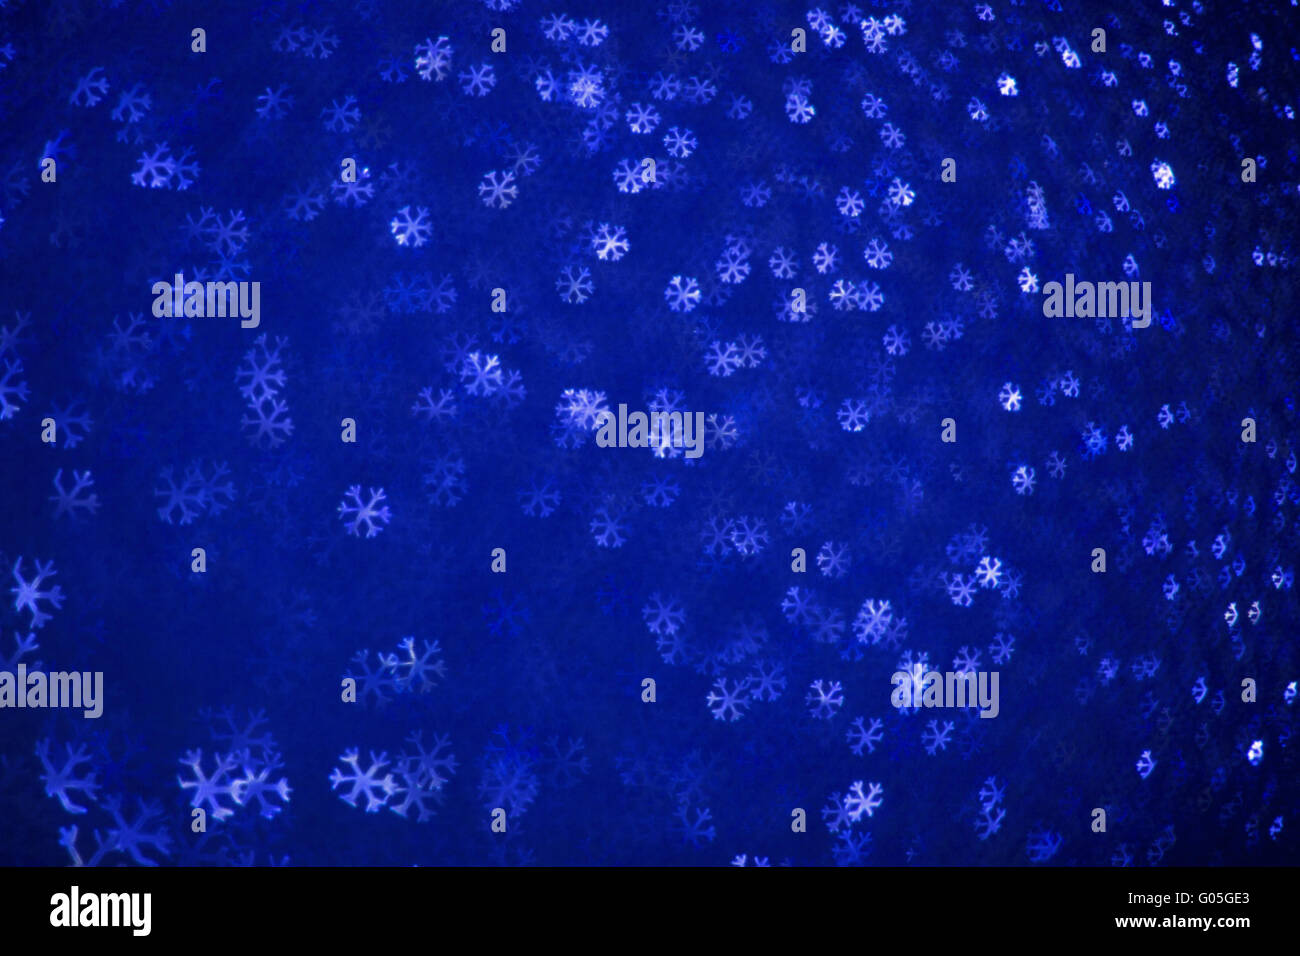 Beautiful festive abstract background with many snowflakes Stock Photo